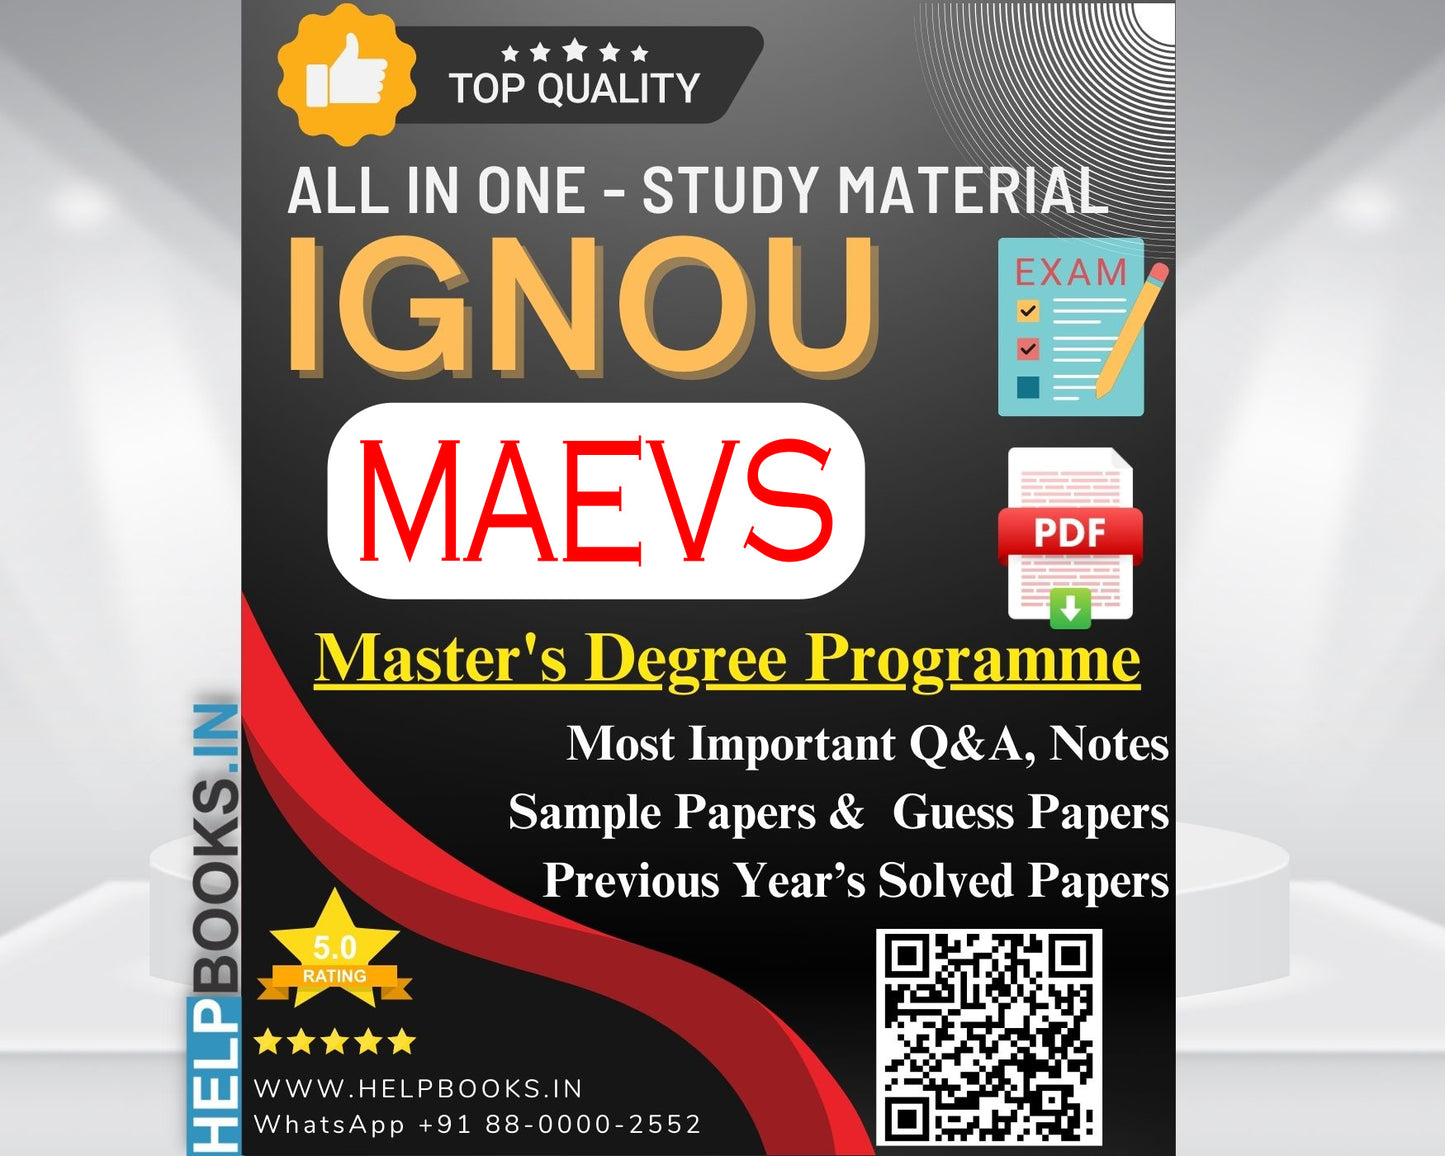 MAEVS IGNOU Exam Combo of 10 Solved Papers: 5 Previous Years' Solved Papers & 5 Sample Guess Papers for Master of Arts Environmental Studies